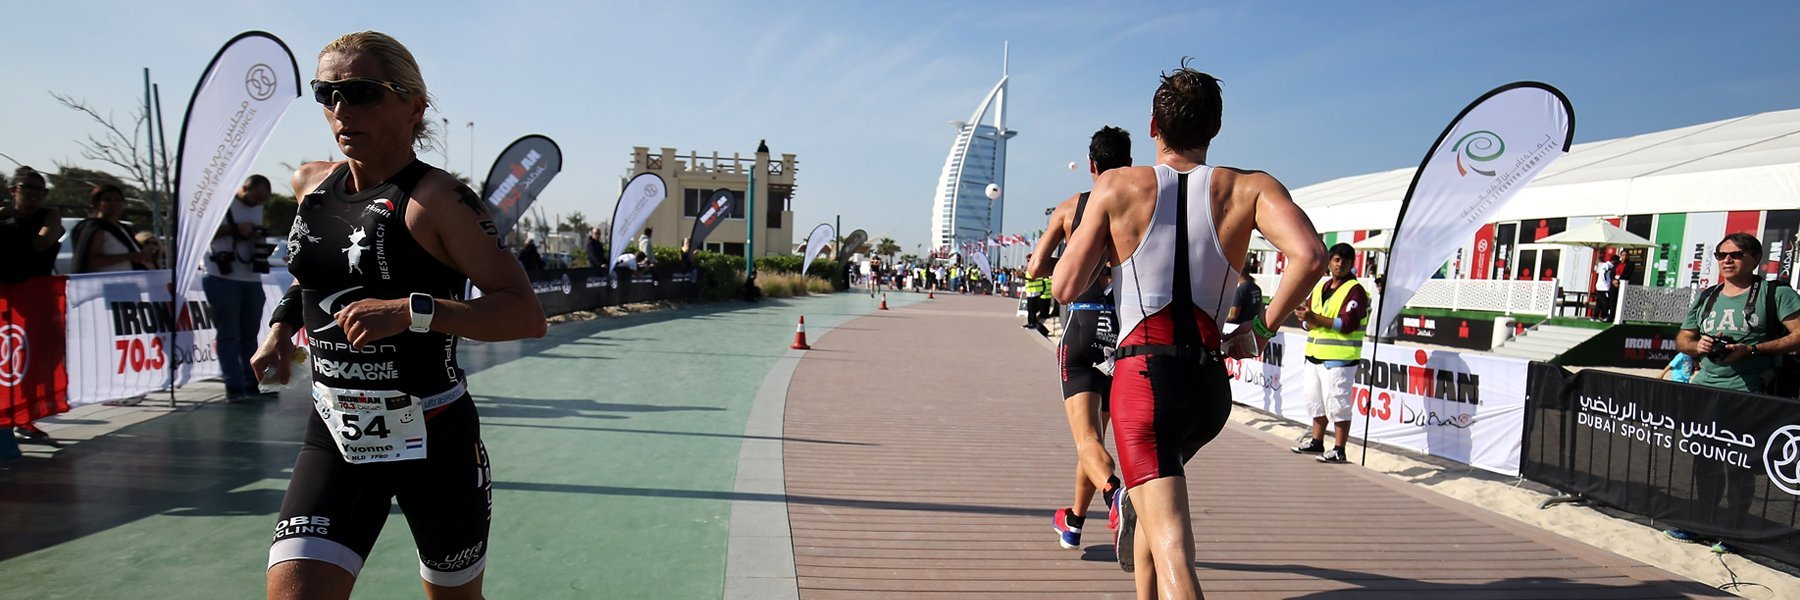 Athletes are running at Jumeirah Public Beach along the coastline with spectators on both sides cheering them on at IRONMAN 70.3 Dubai